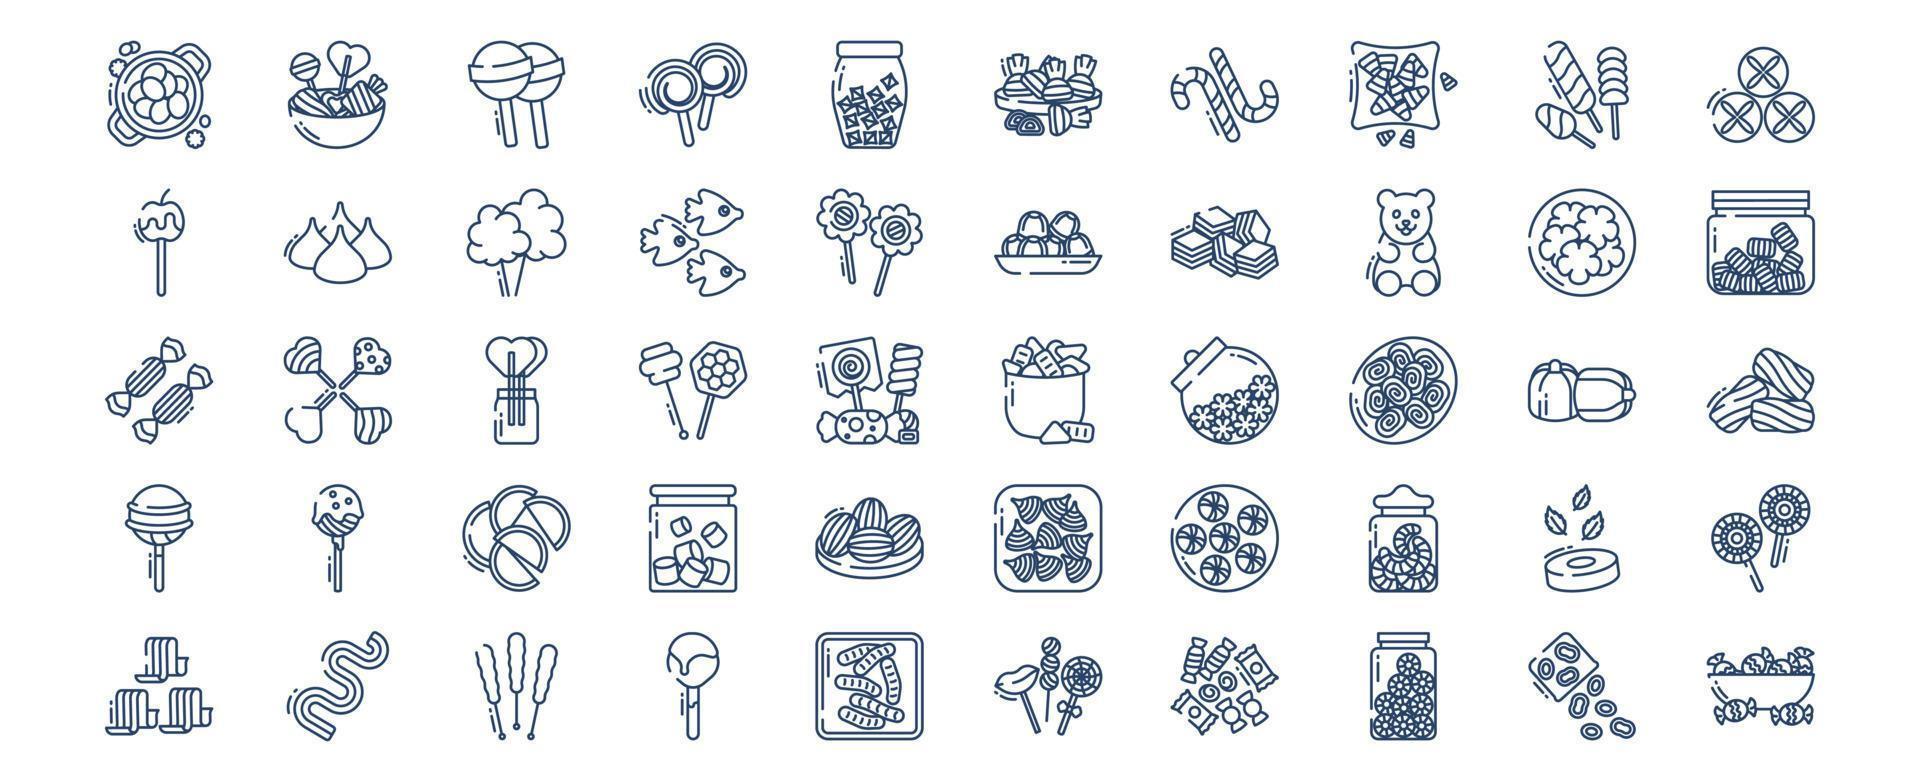 Collection of icons related to Candies and sweets, including icons like ball lollipop, Candy and more. vector illustrations, Pixel Perfect set